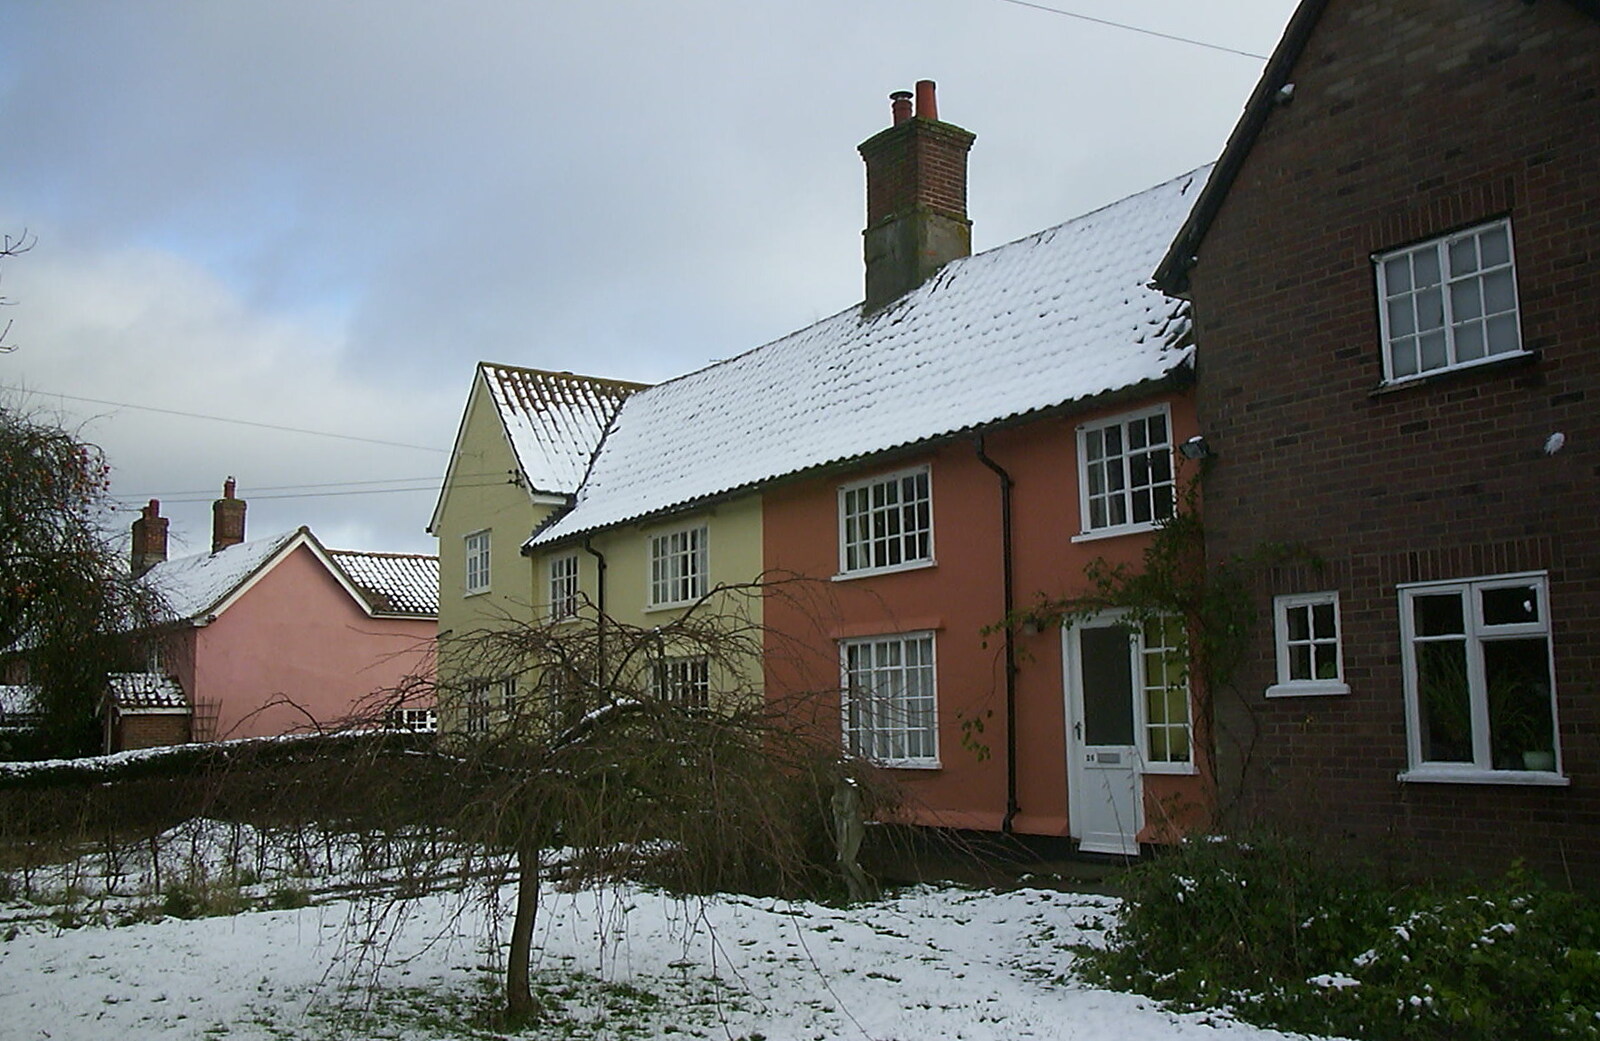 The house in snow from Mother and Mike Visit, and Cat Photos, Brome, Suffolk - 1st September 2002